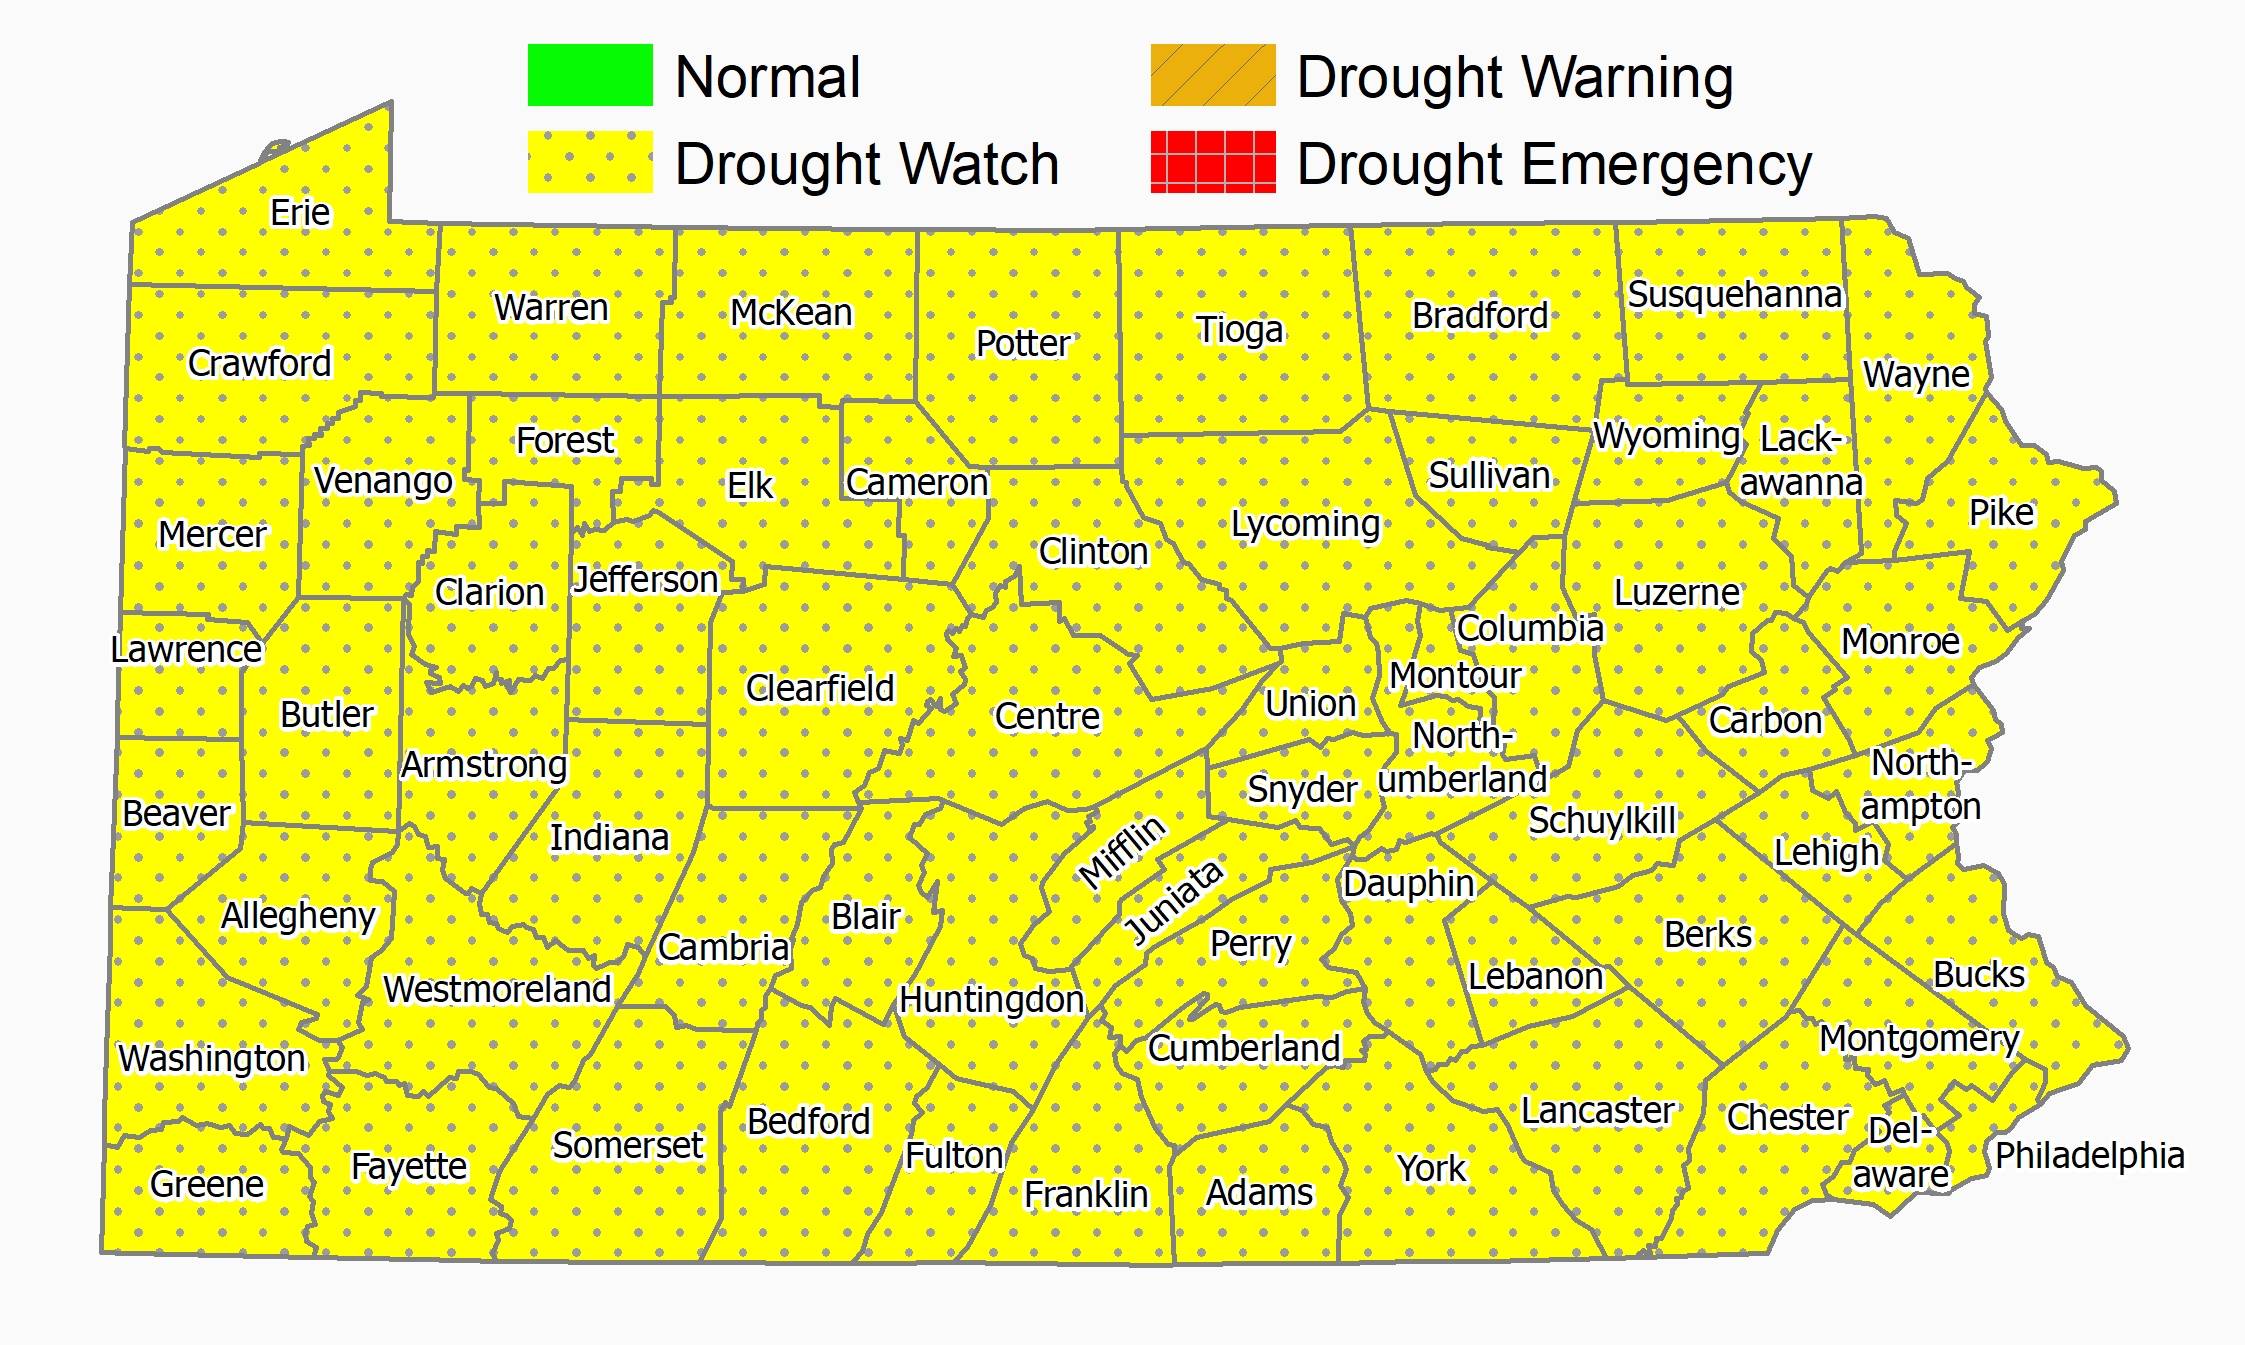 Pennsylvania Drought Map indicating that the entire state is under a drought watch